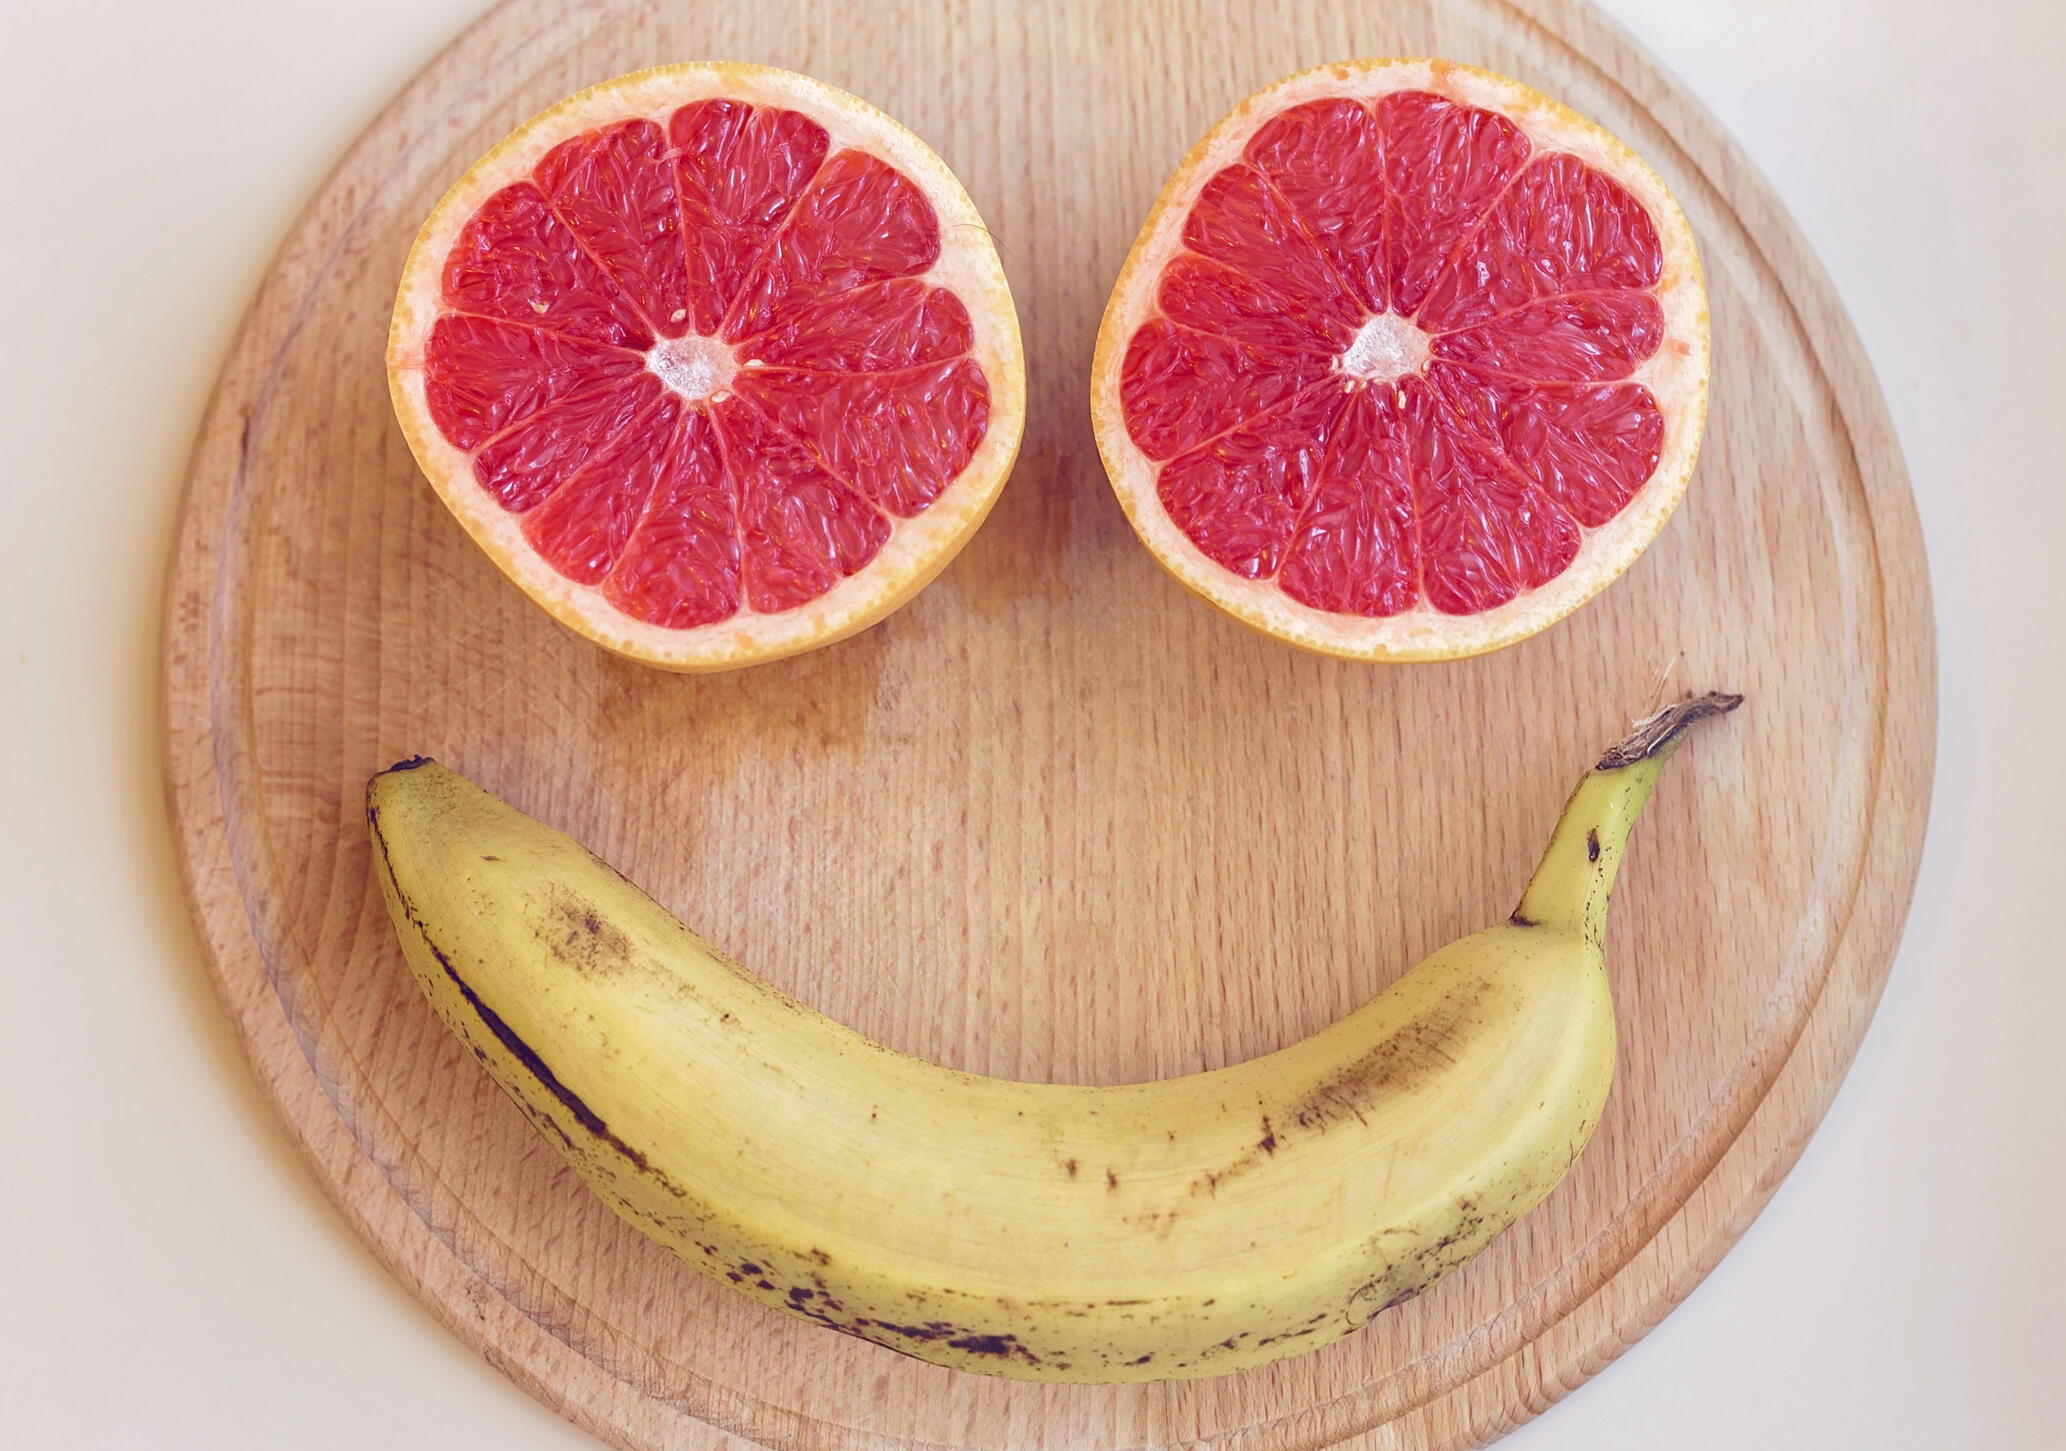 Smiling face made from fruit on a wooden background